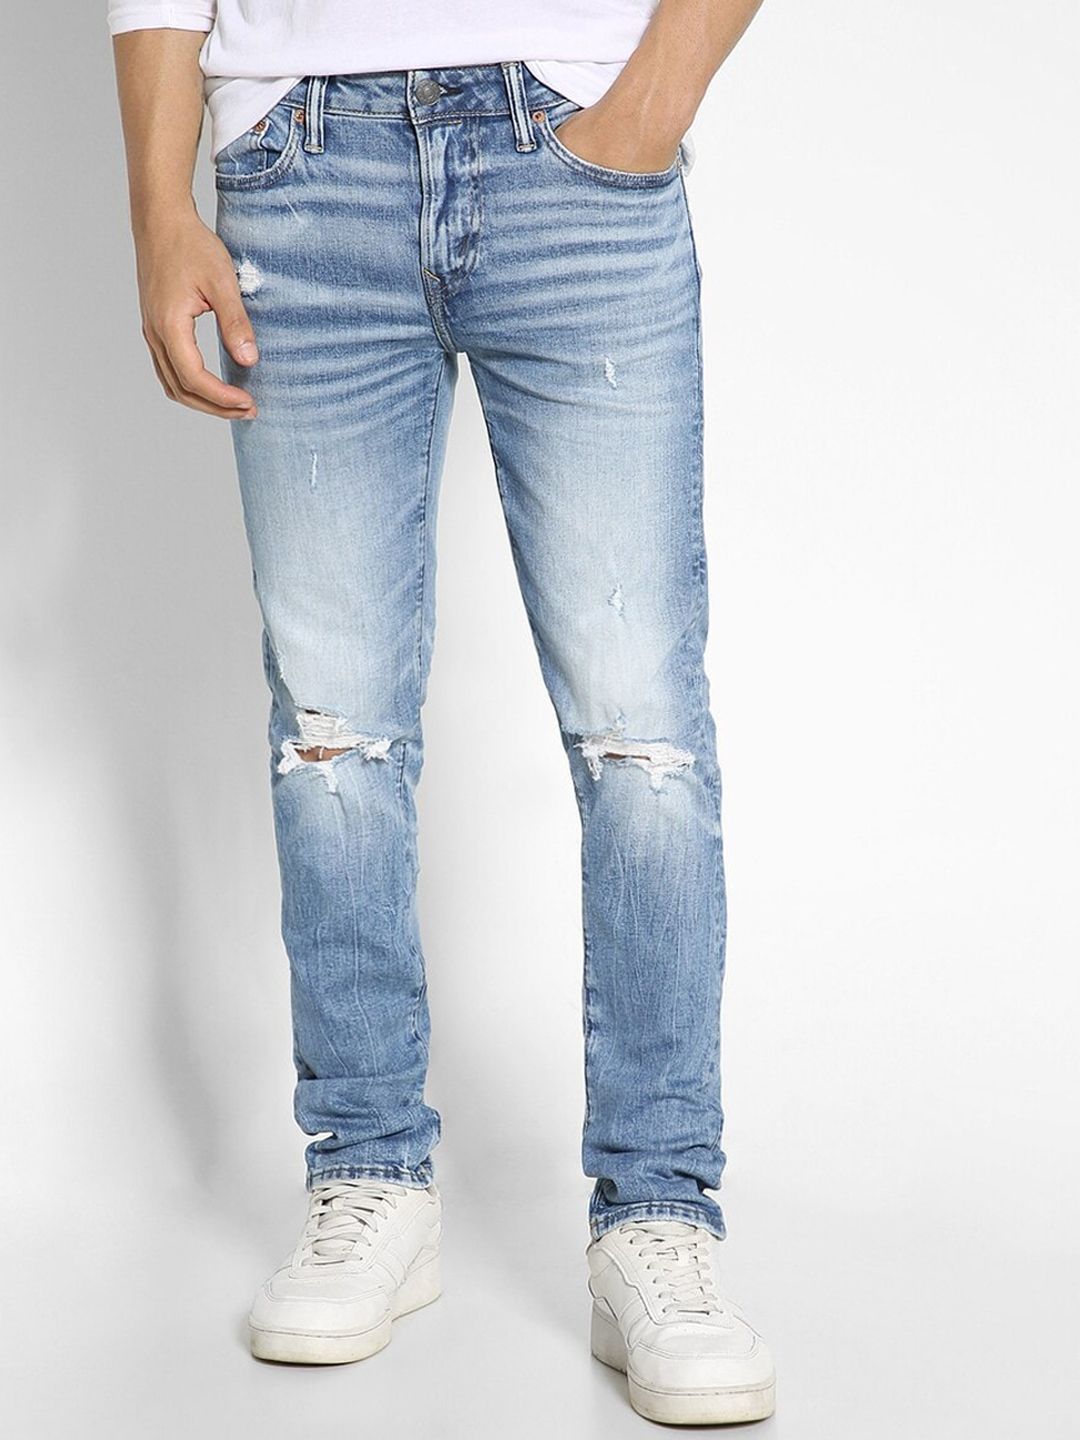 AMERICAN EAGLE OUTFITTERS Men Slim Fit Ripped Clean Look Jeans